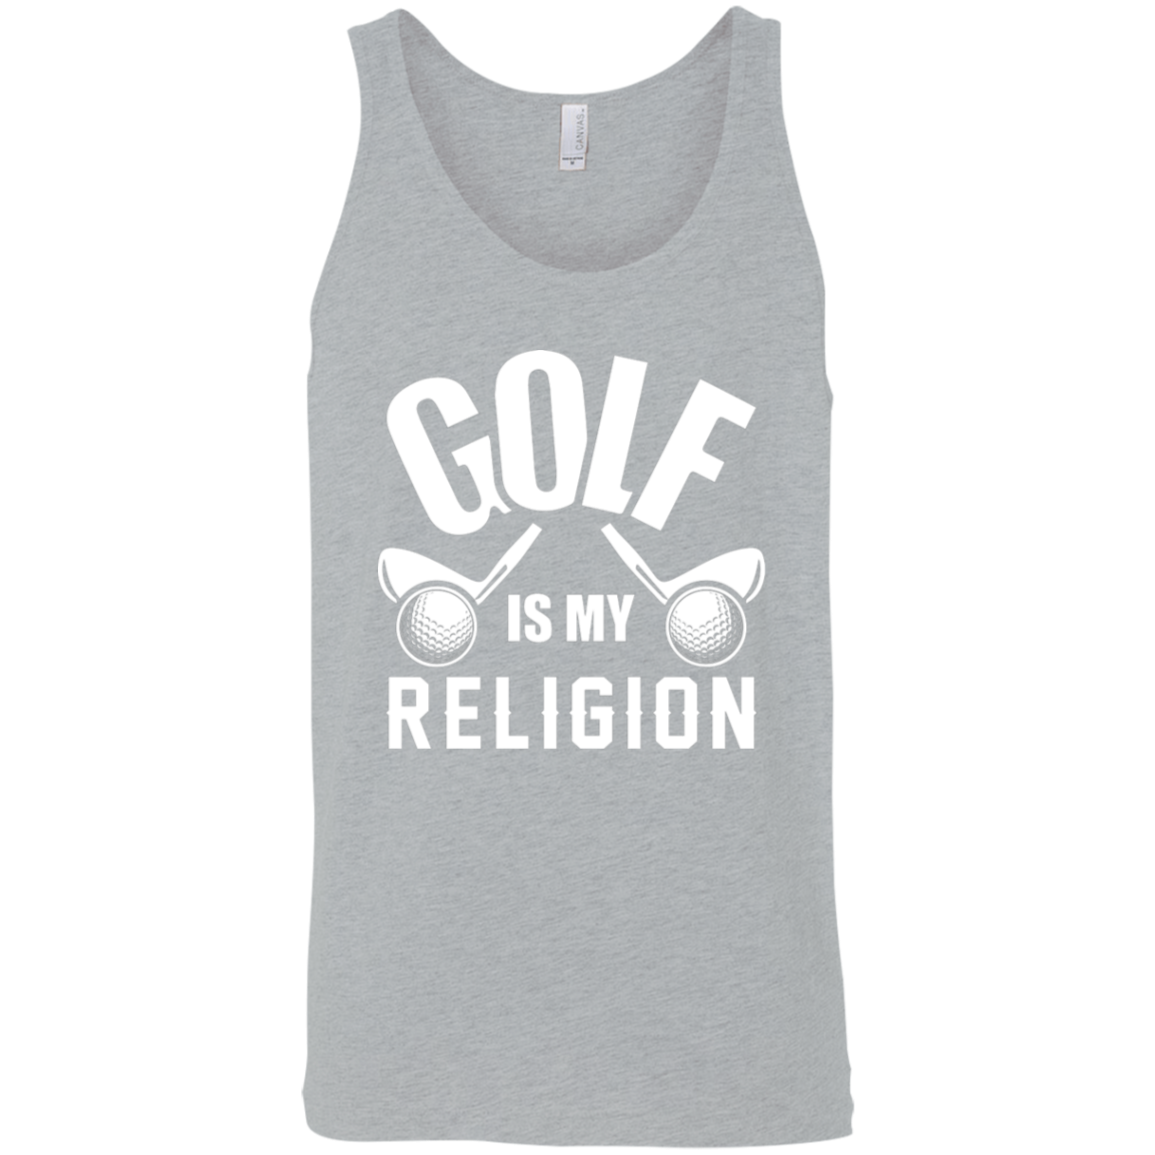 Golf Is my Religion Tank Top Apparel - The Beer Lodge